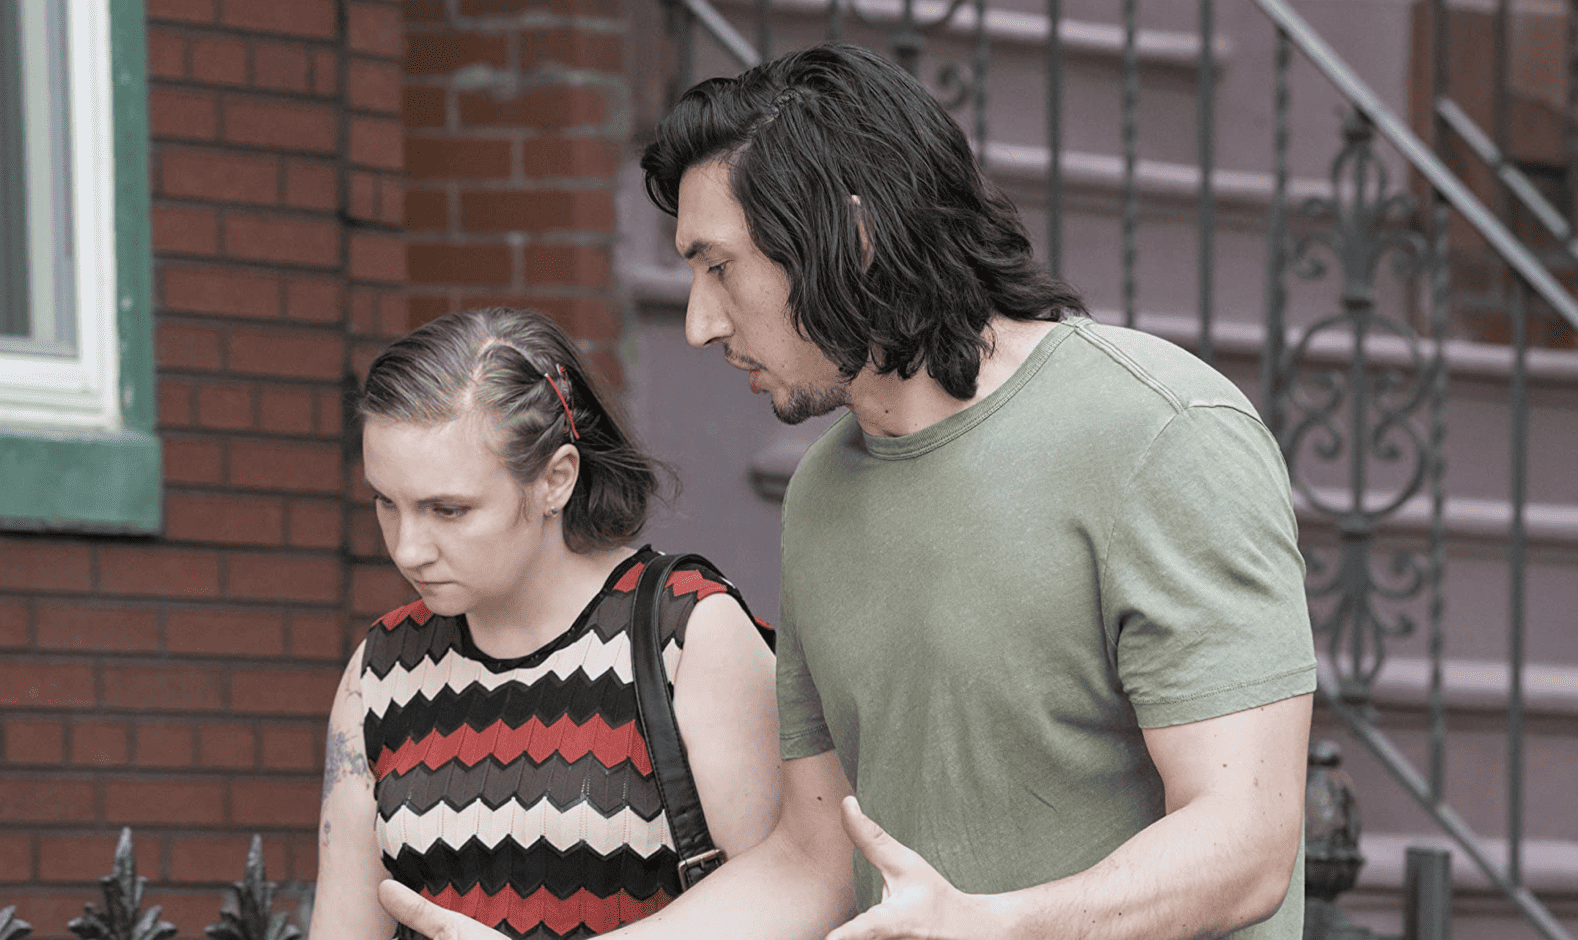 Adam and Hannah tensely walk the streets of Brooklyn in this image from Apatow Productions